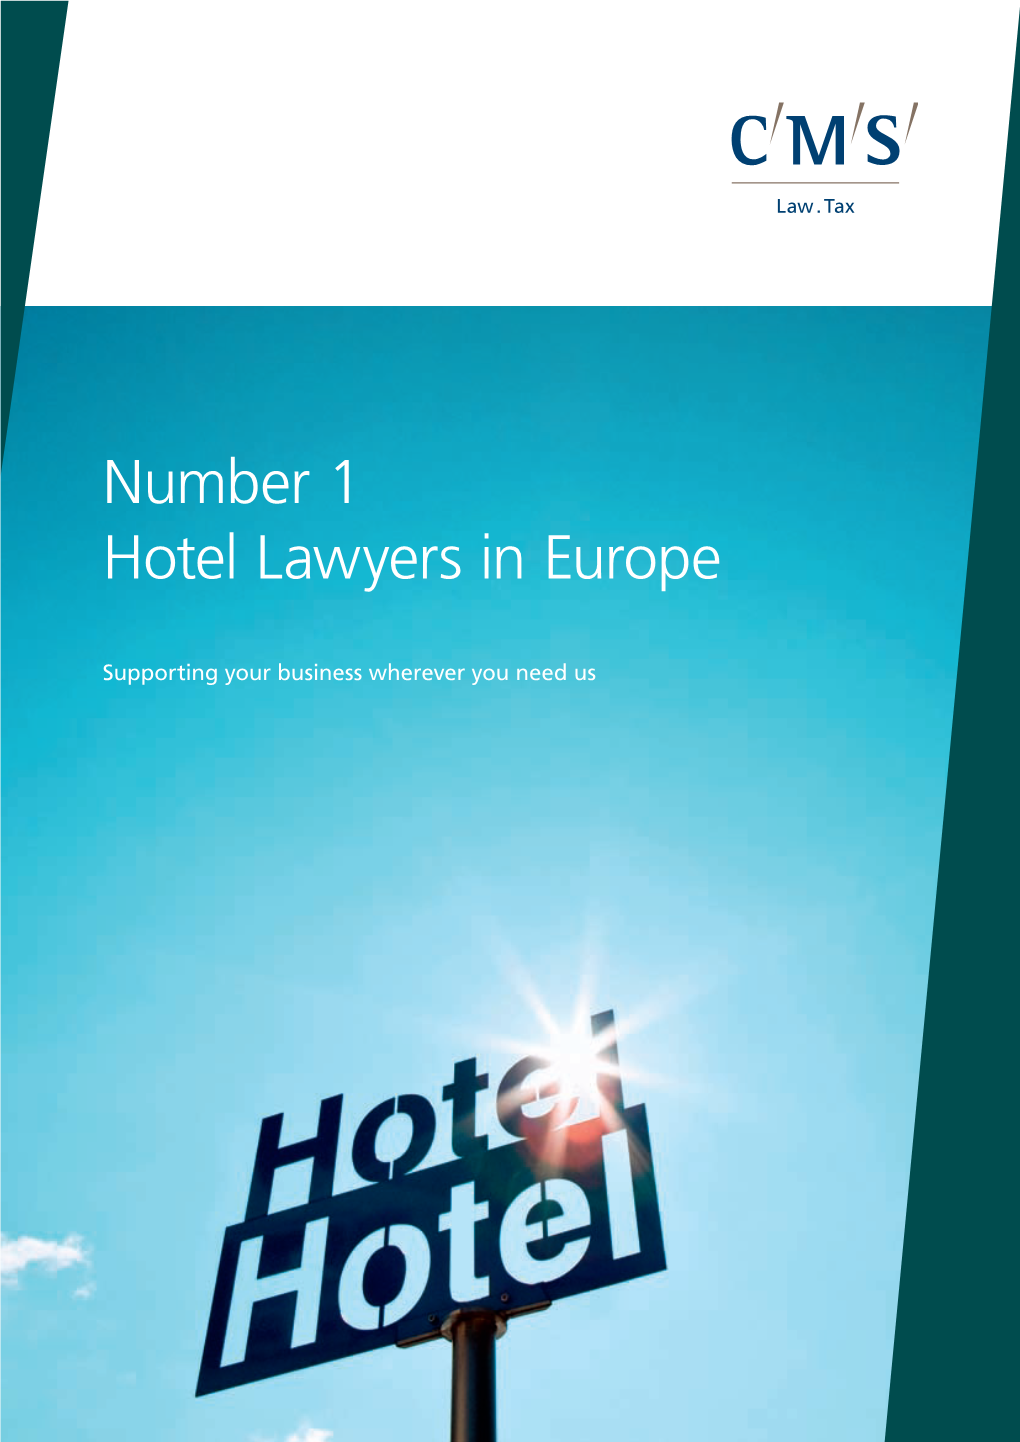 Number 1 Hotel Lawyers in Europe